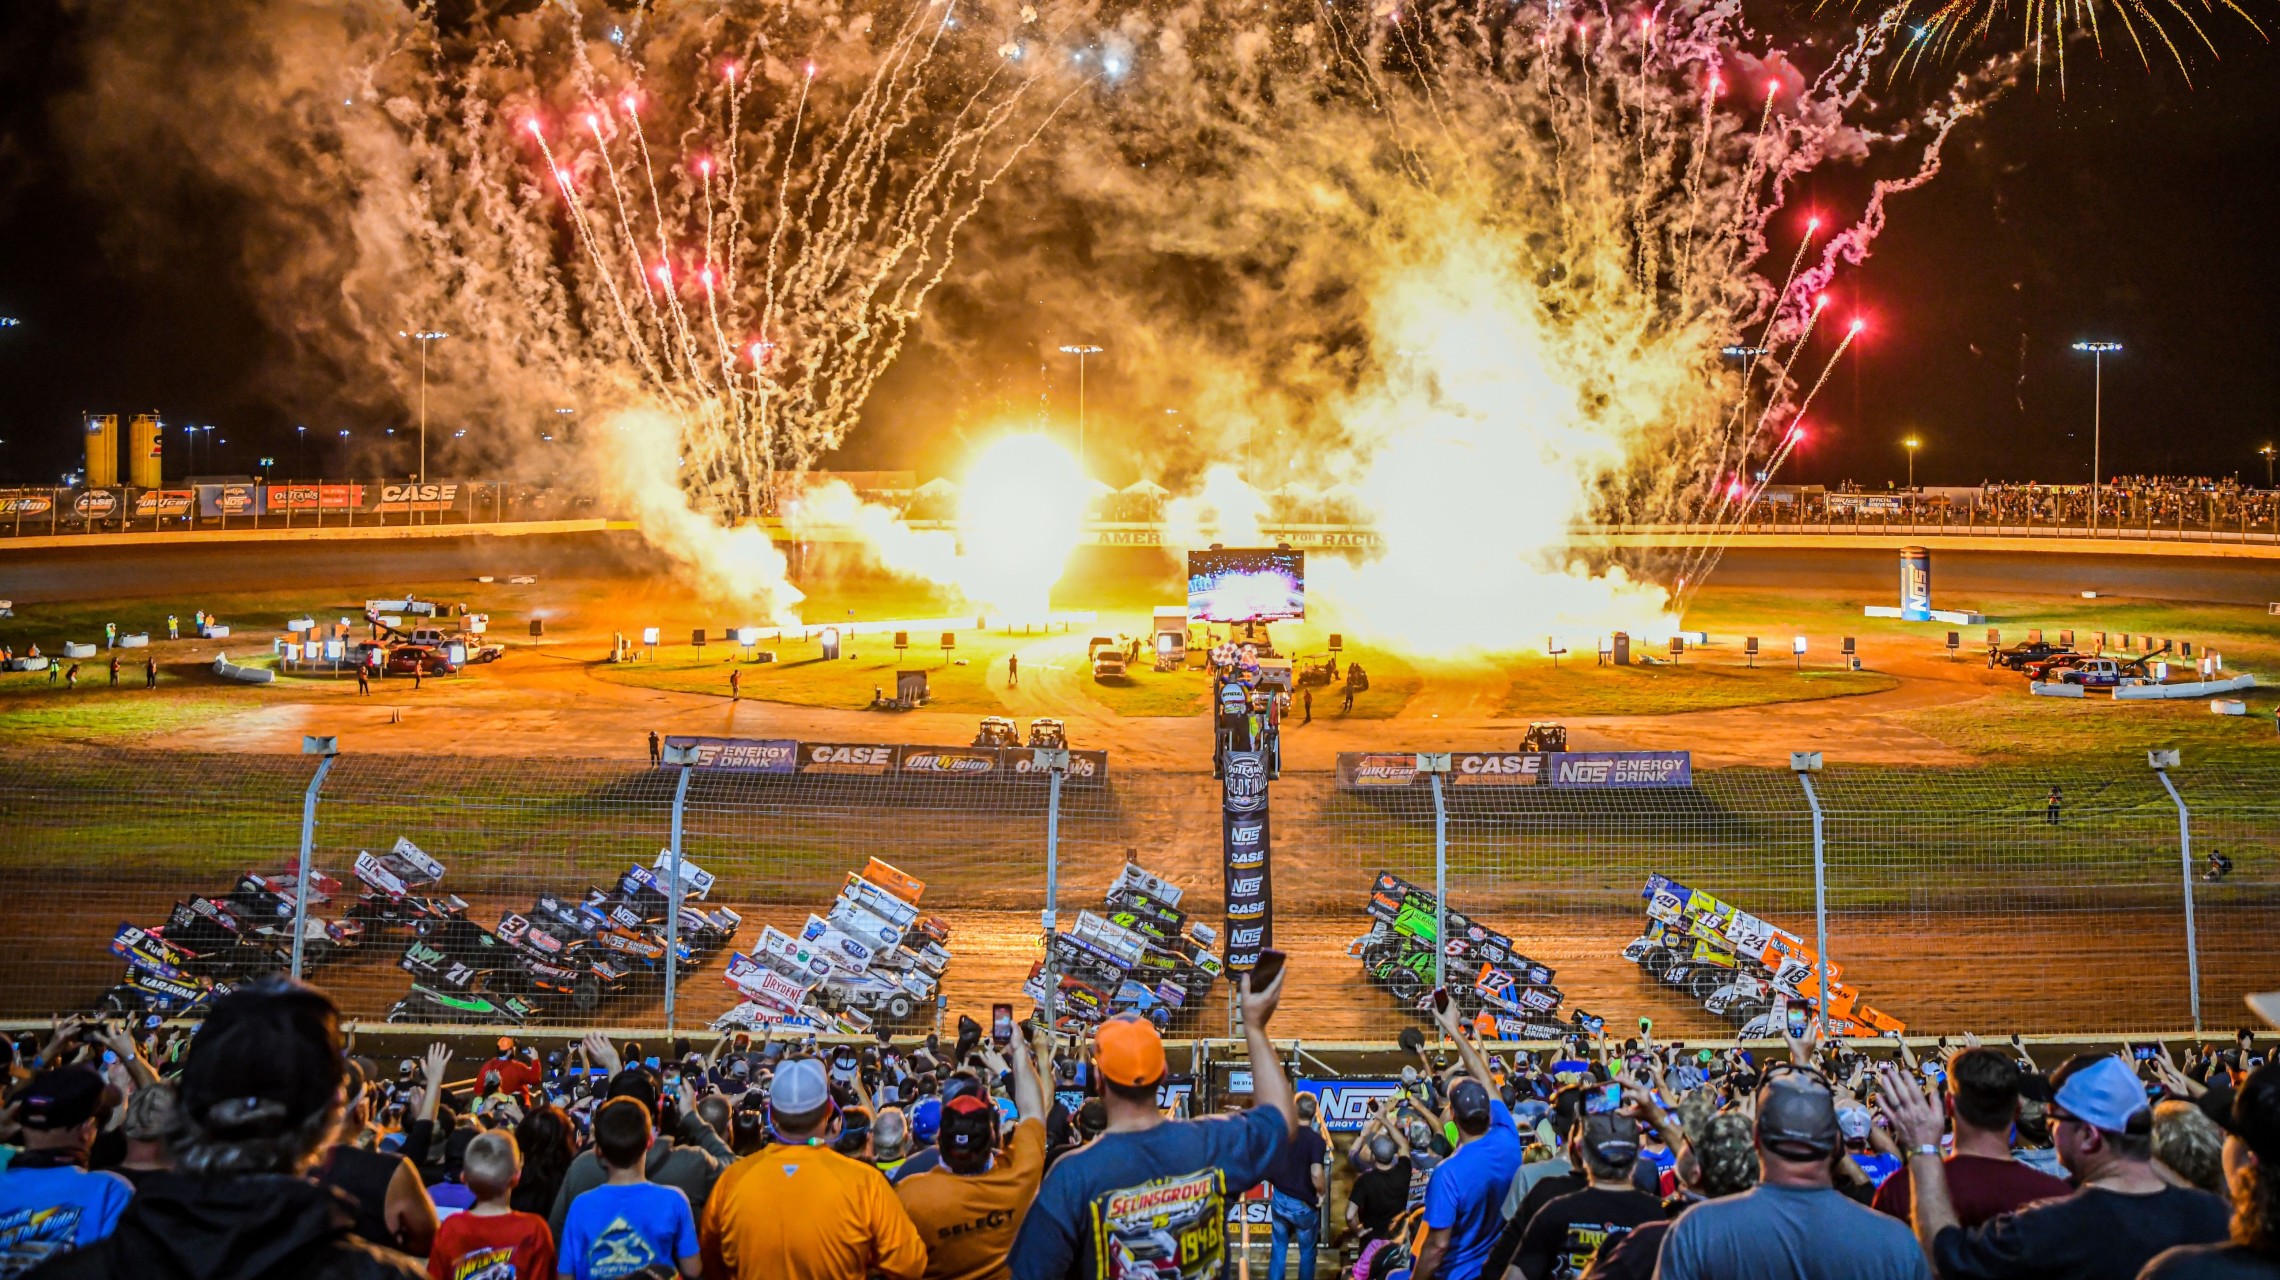 fans cheer as race cars pass on track with fireworks